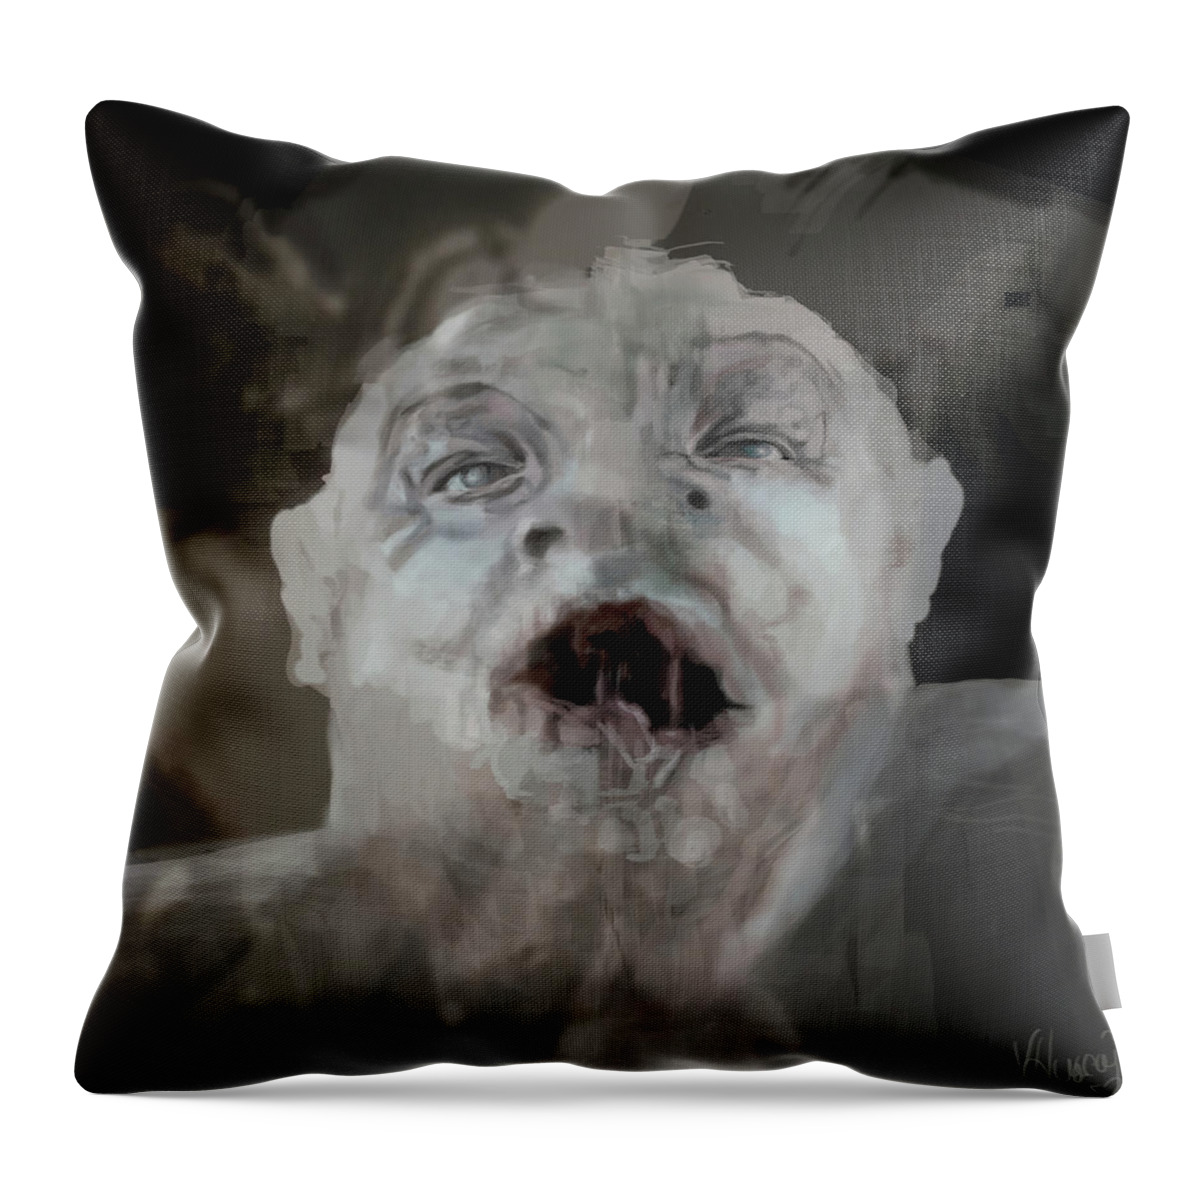 #epiphany Throw Pillow featuring the digital art Epiphany 5 by Veronica Huacuja